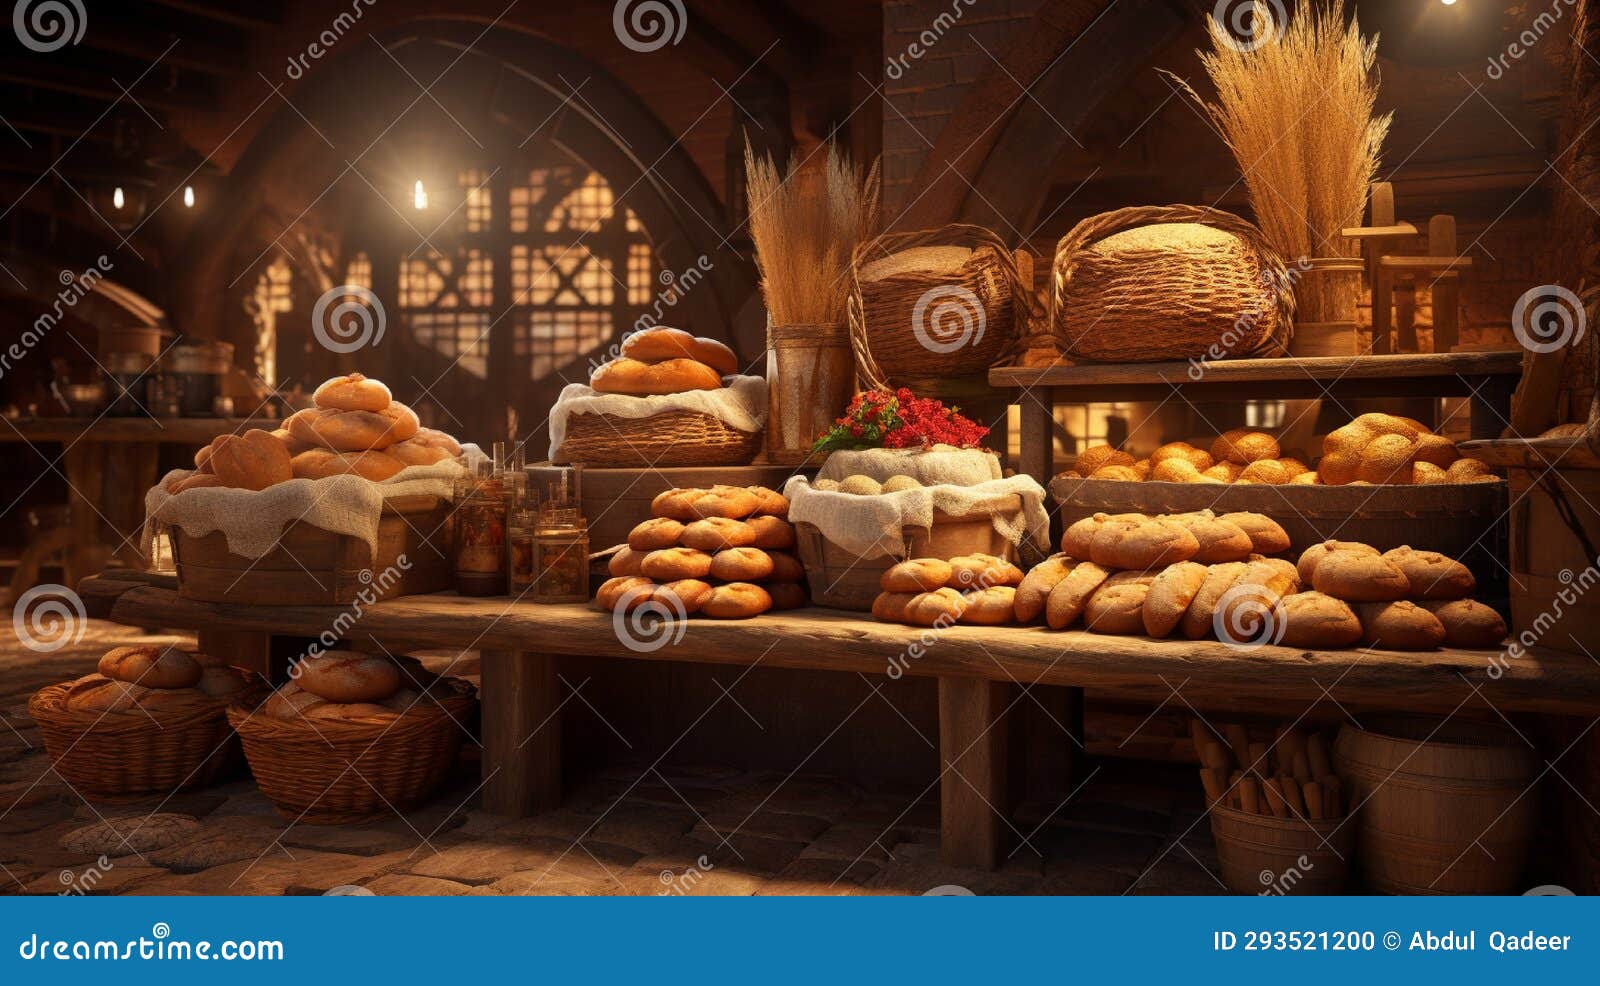 a traditional bakery, the aroma of freshly baked bread wafting.